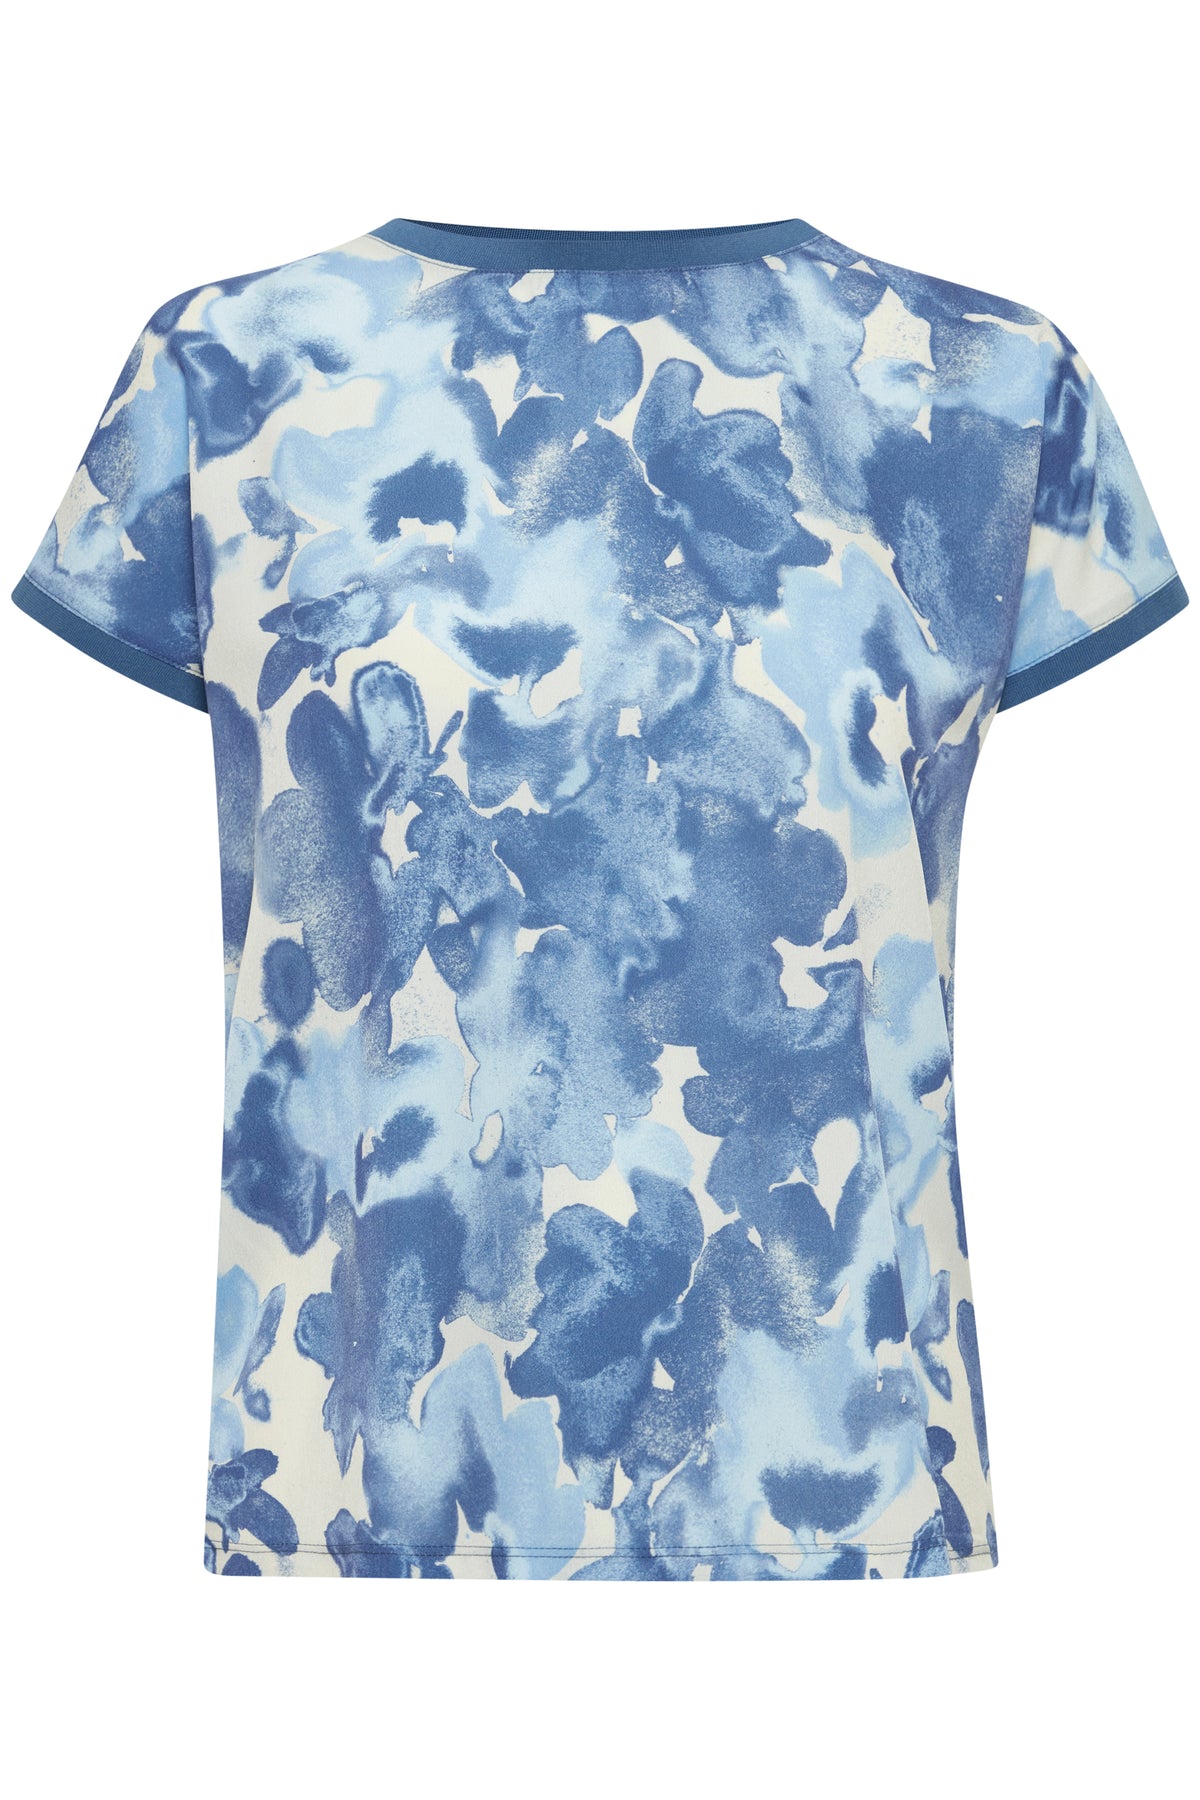 B.Young Bypanya True Navy Mix Printed Front T-Shirt, 20814434